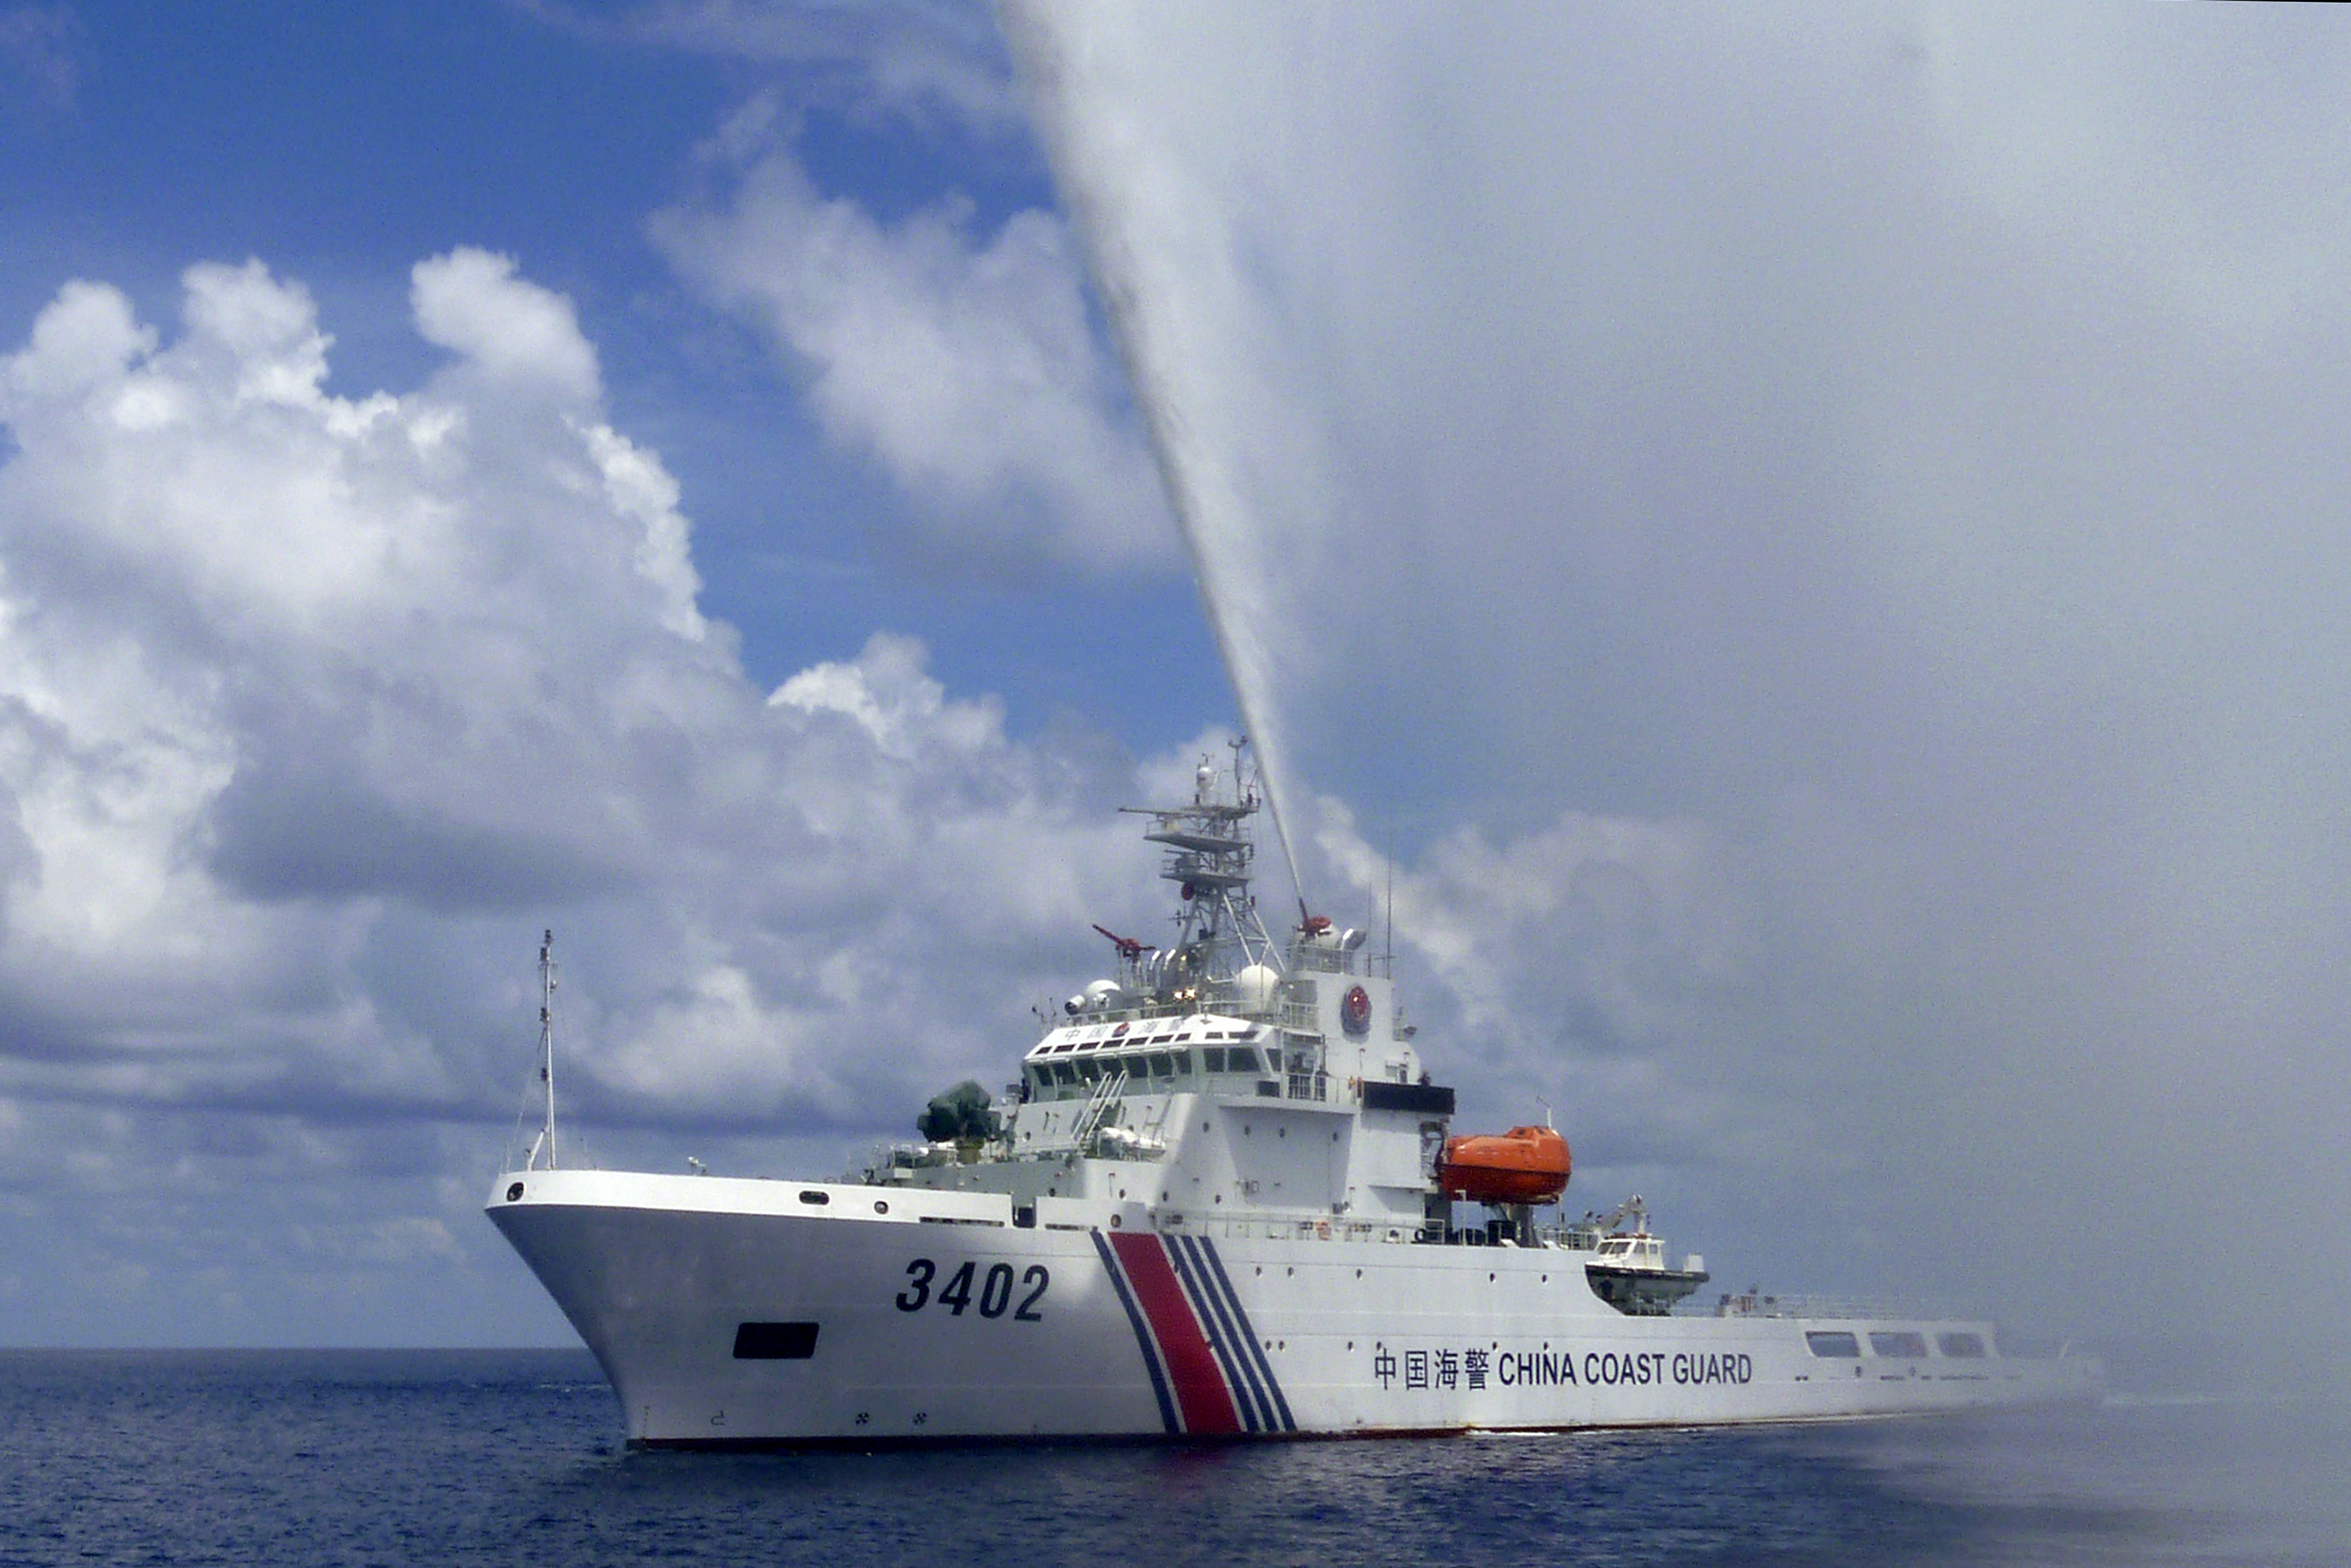 In this Sept. 23, 2015, photo, provided by Filipino fisherman Renato Etac, a Chinese Coast Guard boat sprays a water cannon at Filipino fishermen near Scarborough Shoal in the South China Sea. A landmark ruling on an arbitration case filed by the Philippines that seeks to strike down China's expansive territorial claims in the South China Sea will be a test for international law and world powers. China, which demands one-on-one talks to resolve the disputes, has boycotted the case and vowed to ignore the verdict, which will be handed down Tuesday, July 12, 2016, by the U.N. tribunal in The Hague. (Renato Etac via AP)